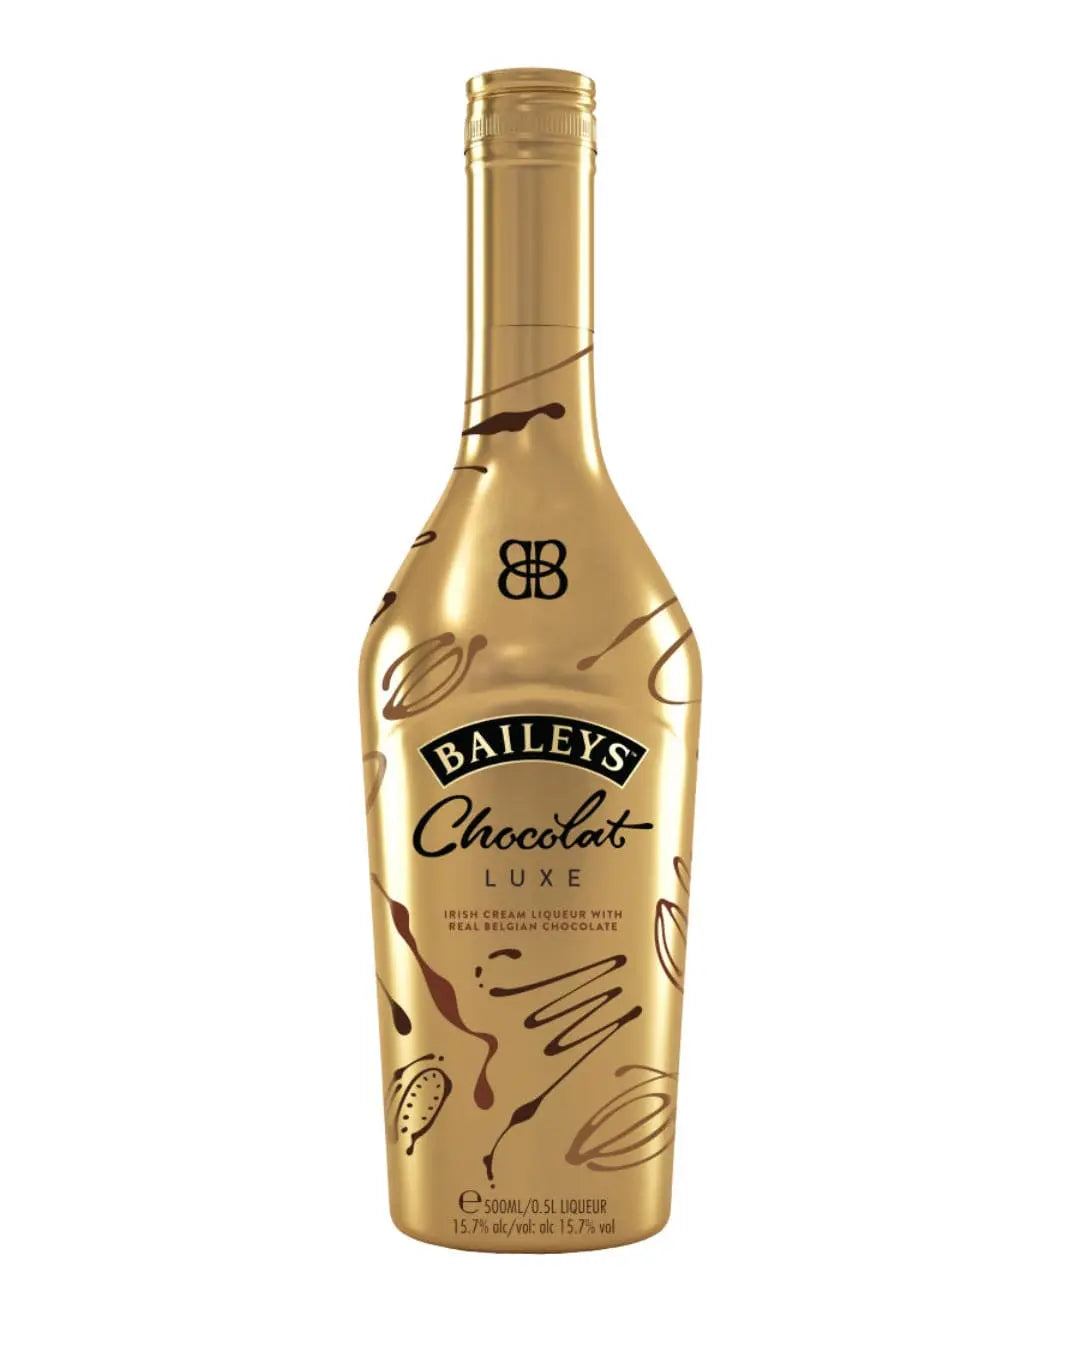 Baileys Chocolate Luxe, 50 cl Liqueurs & Other Spirits 5011013999064